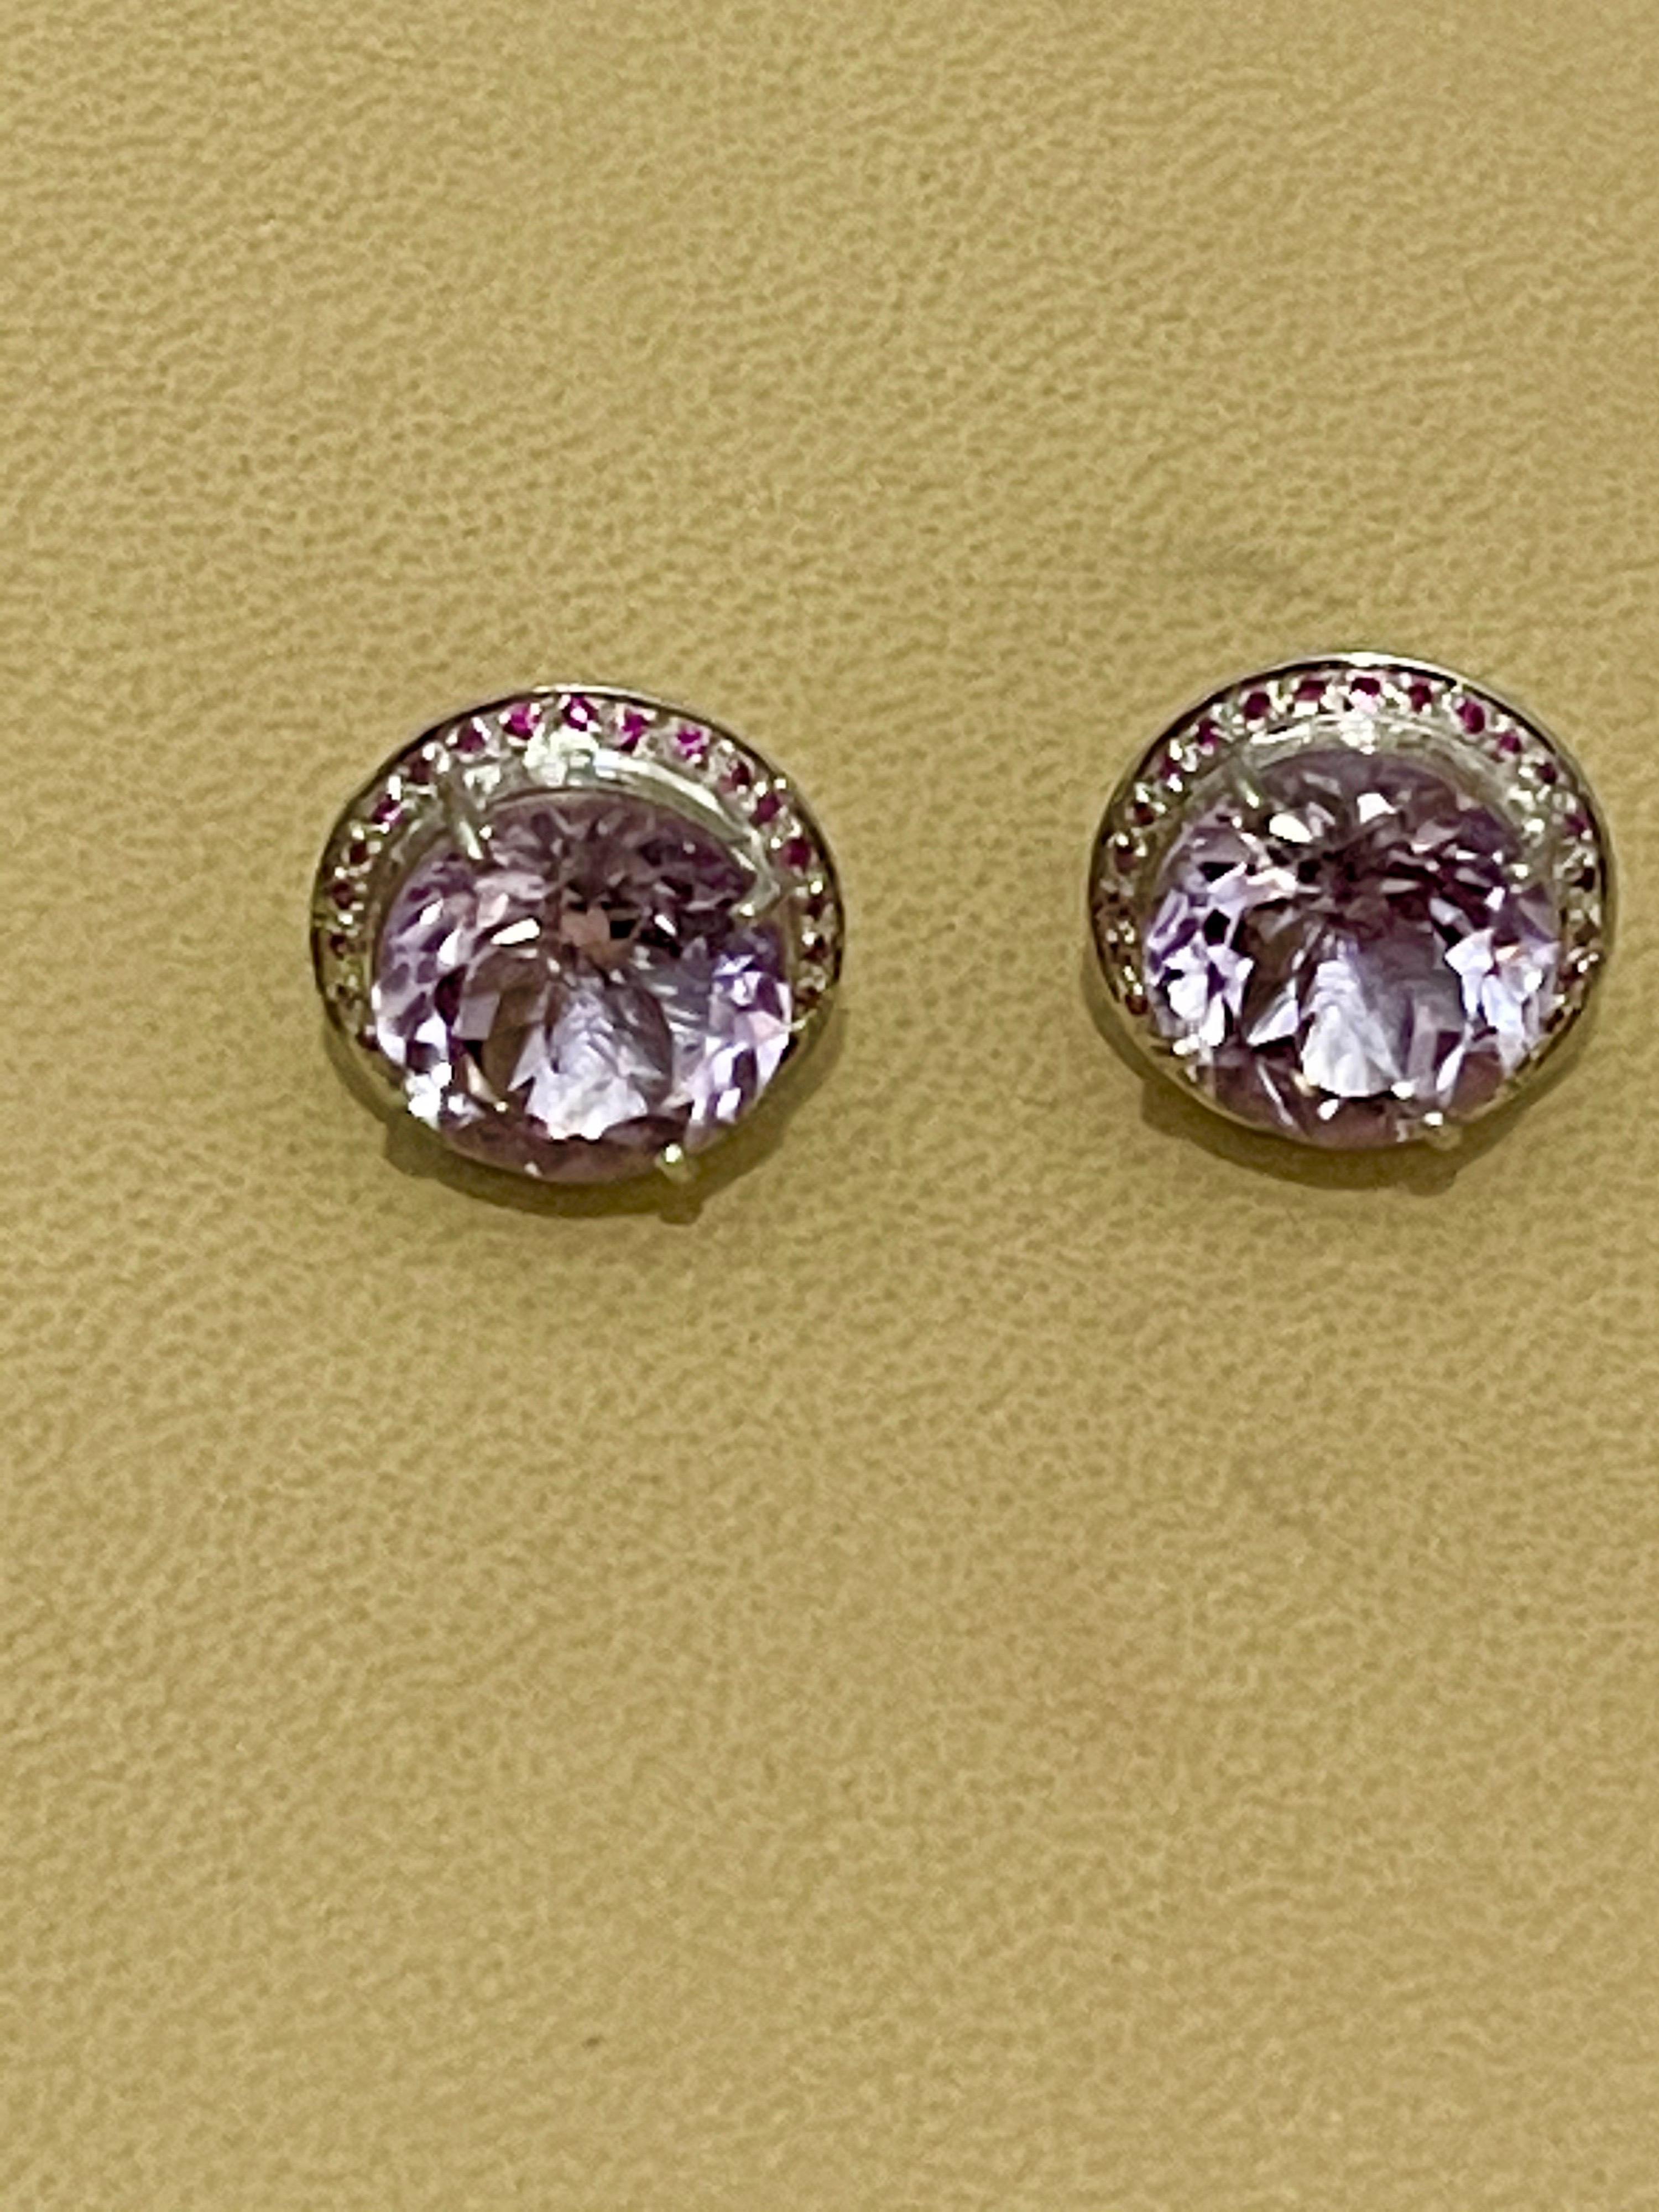 24 Ct Round Natural Pink Amethyst Earrings 18 Karat White Gold Post Backs For Sale 1